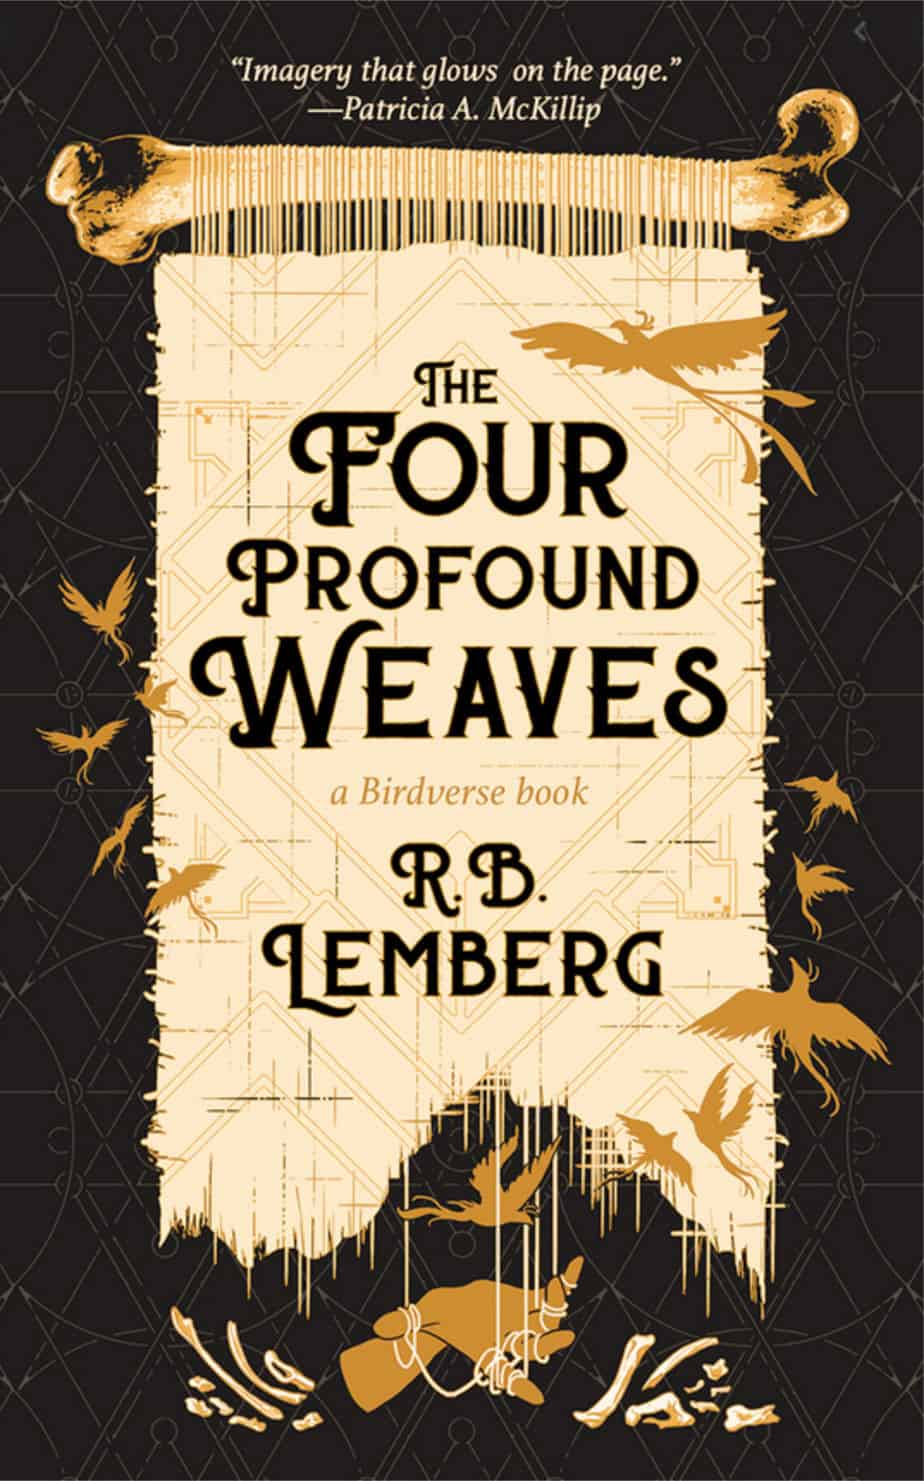 THE FOUR PROFOUND WEAVES BY R.B. LEMBERG